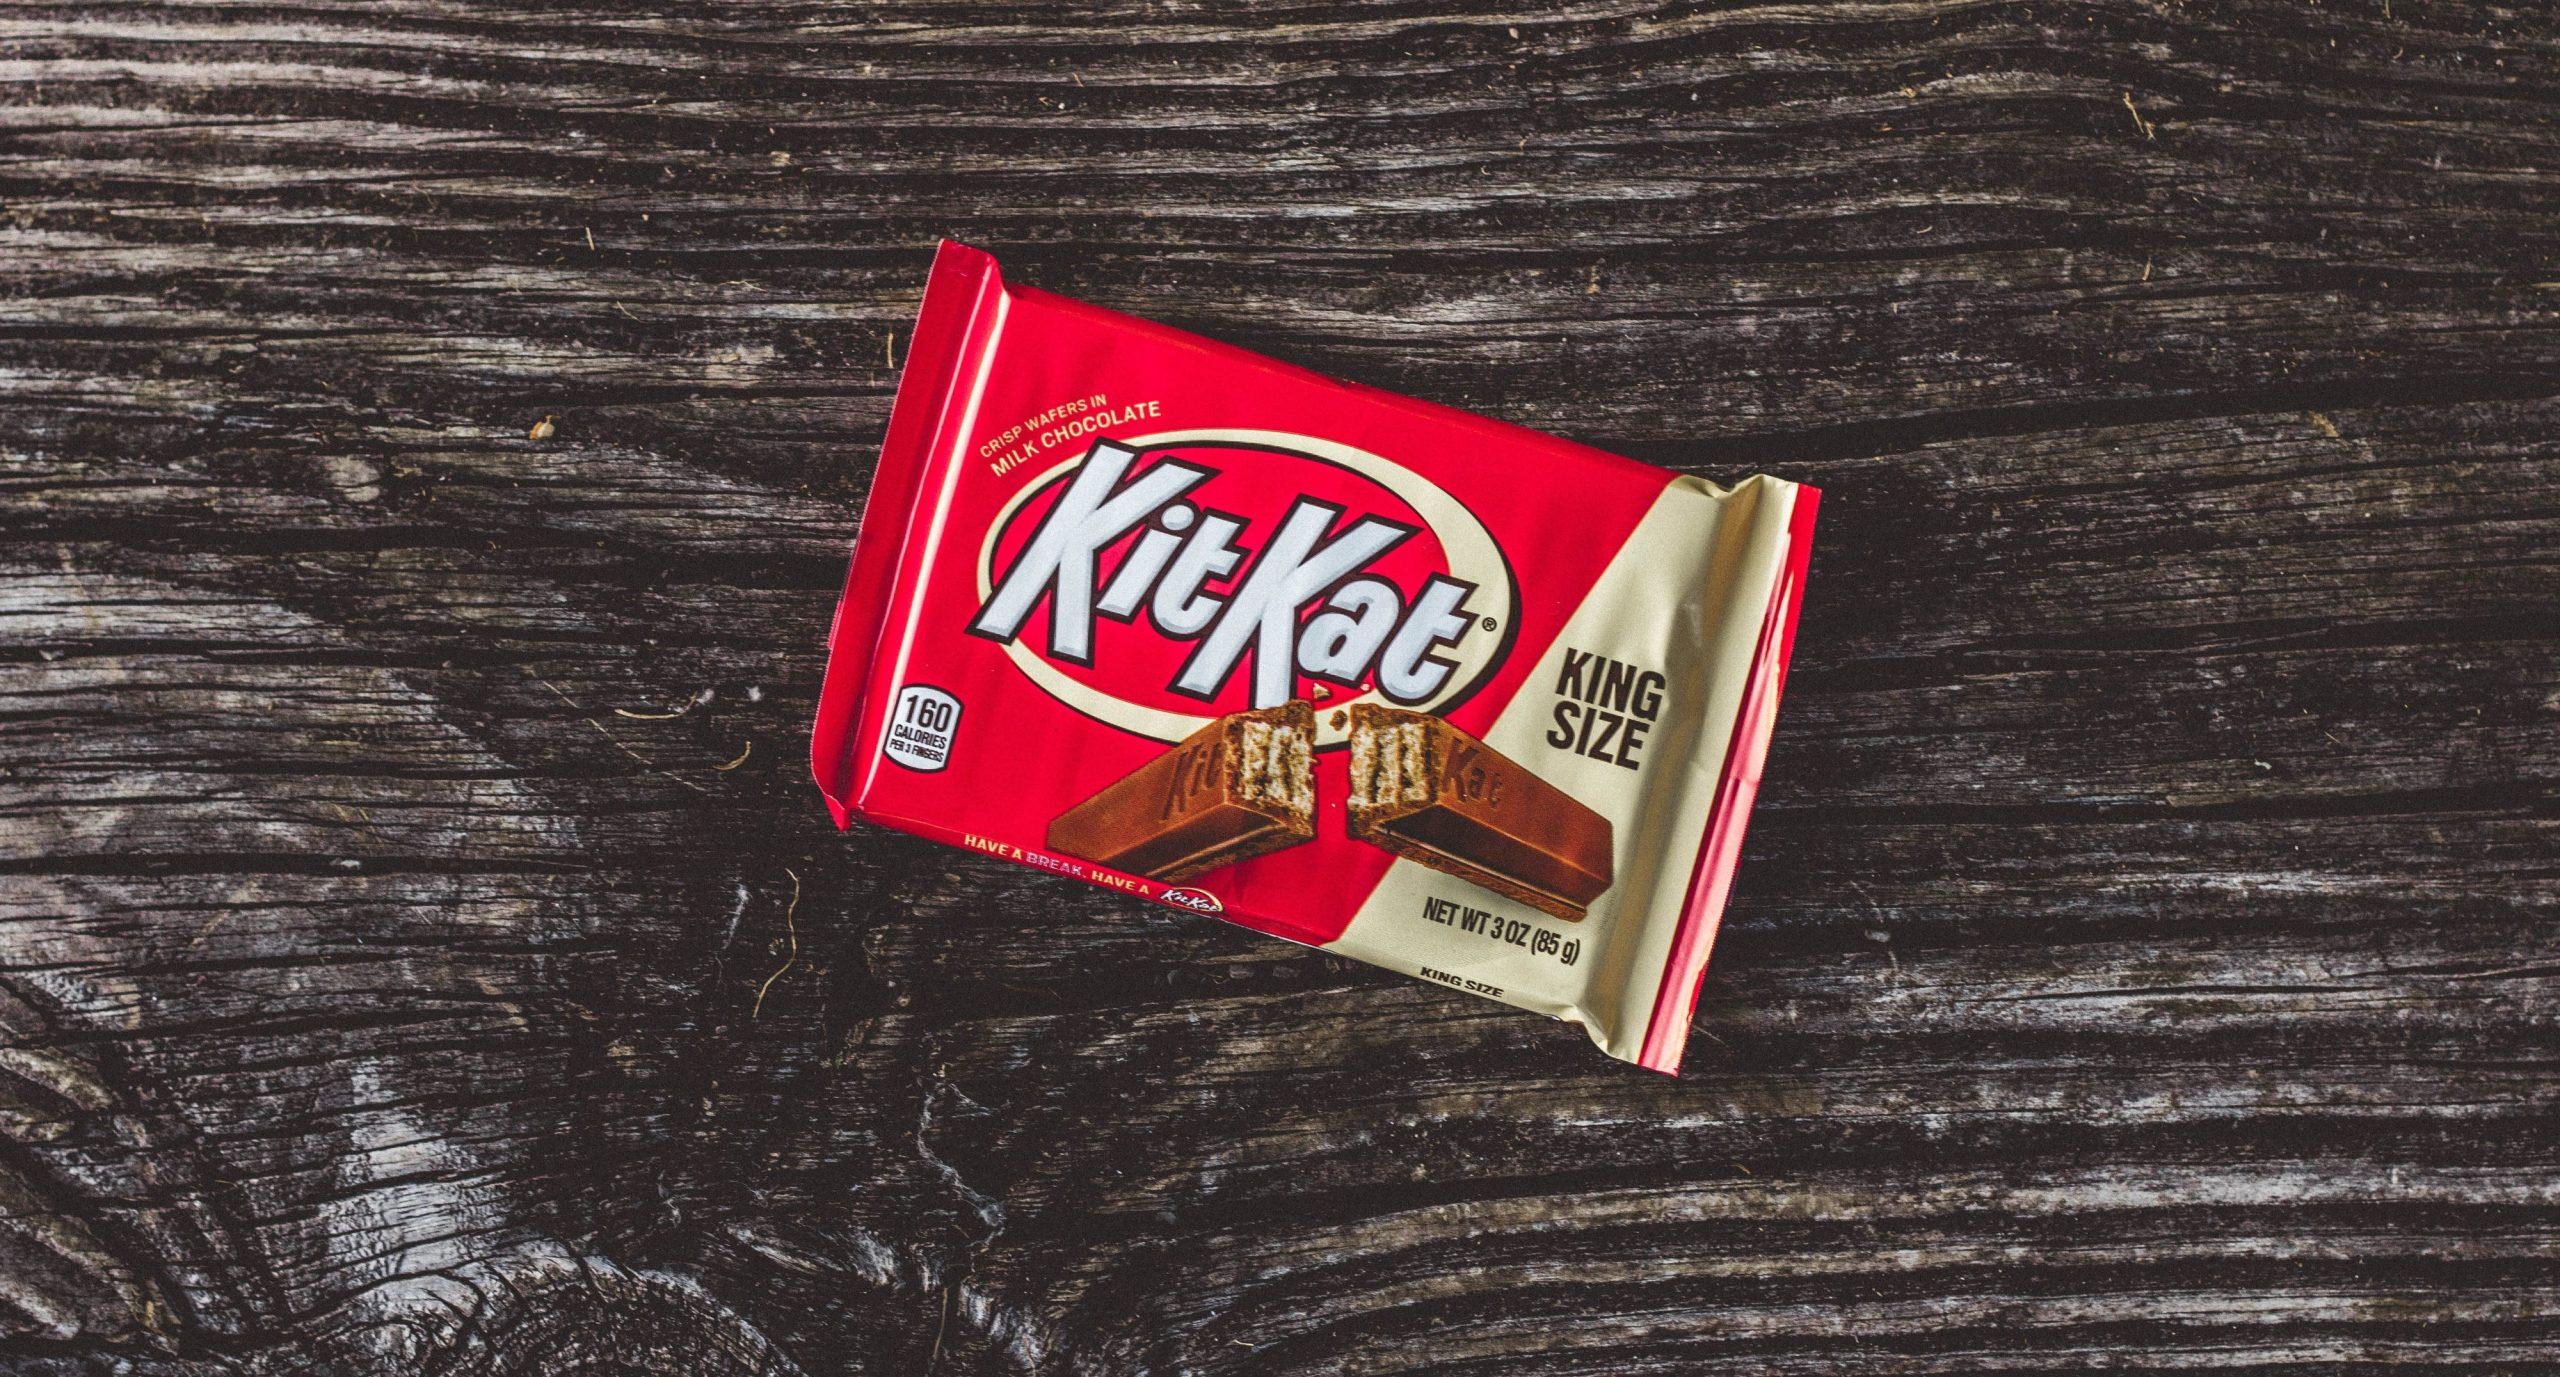 Unopened KitKat confection against a wooden background.